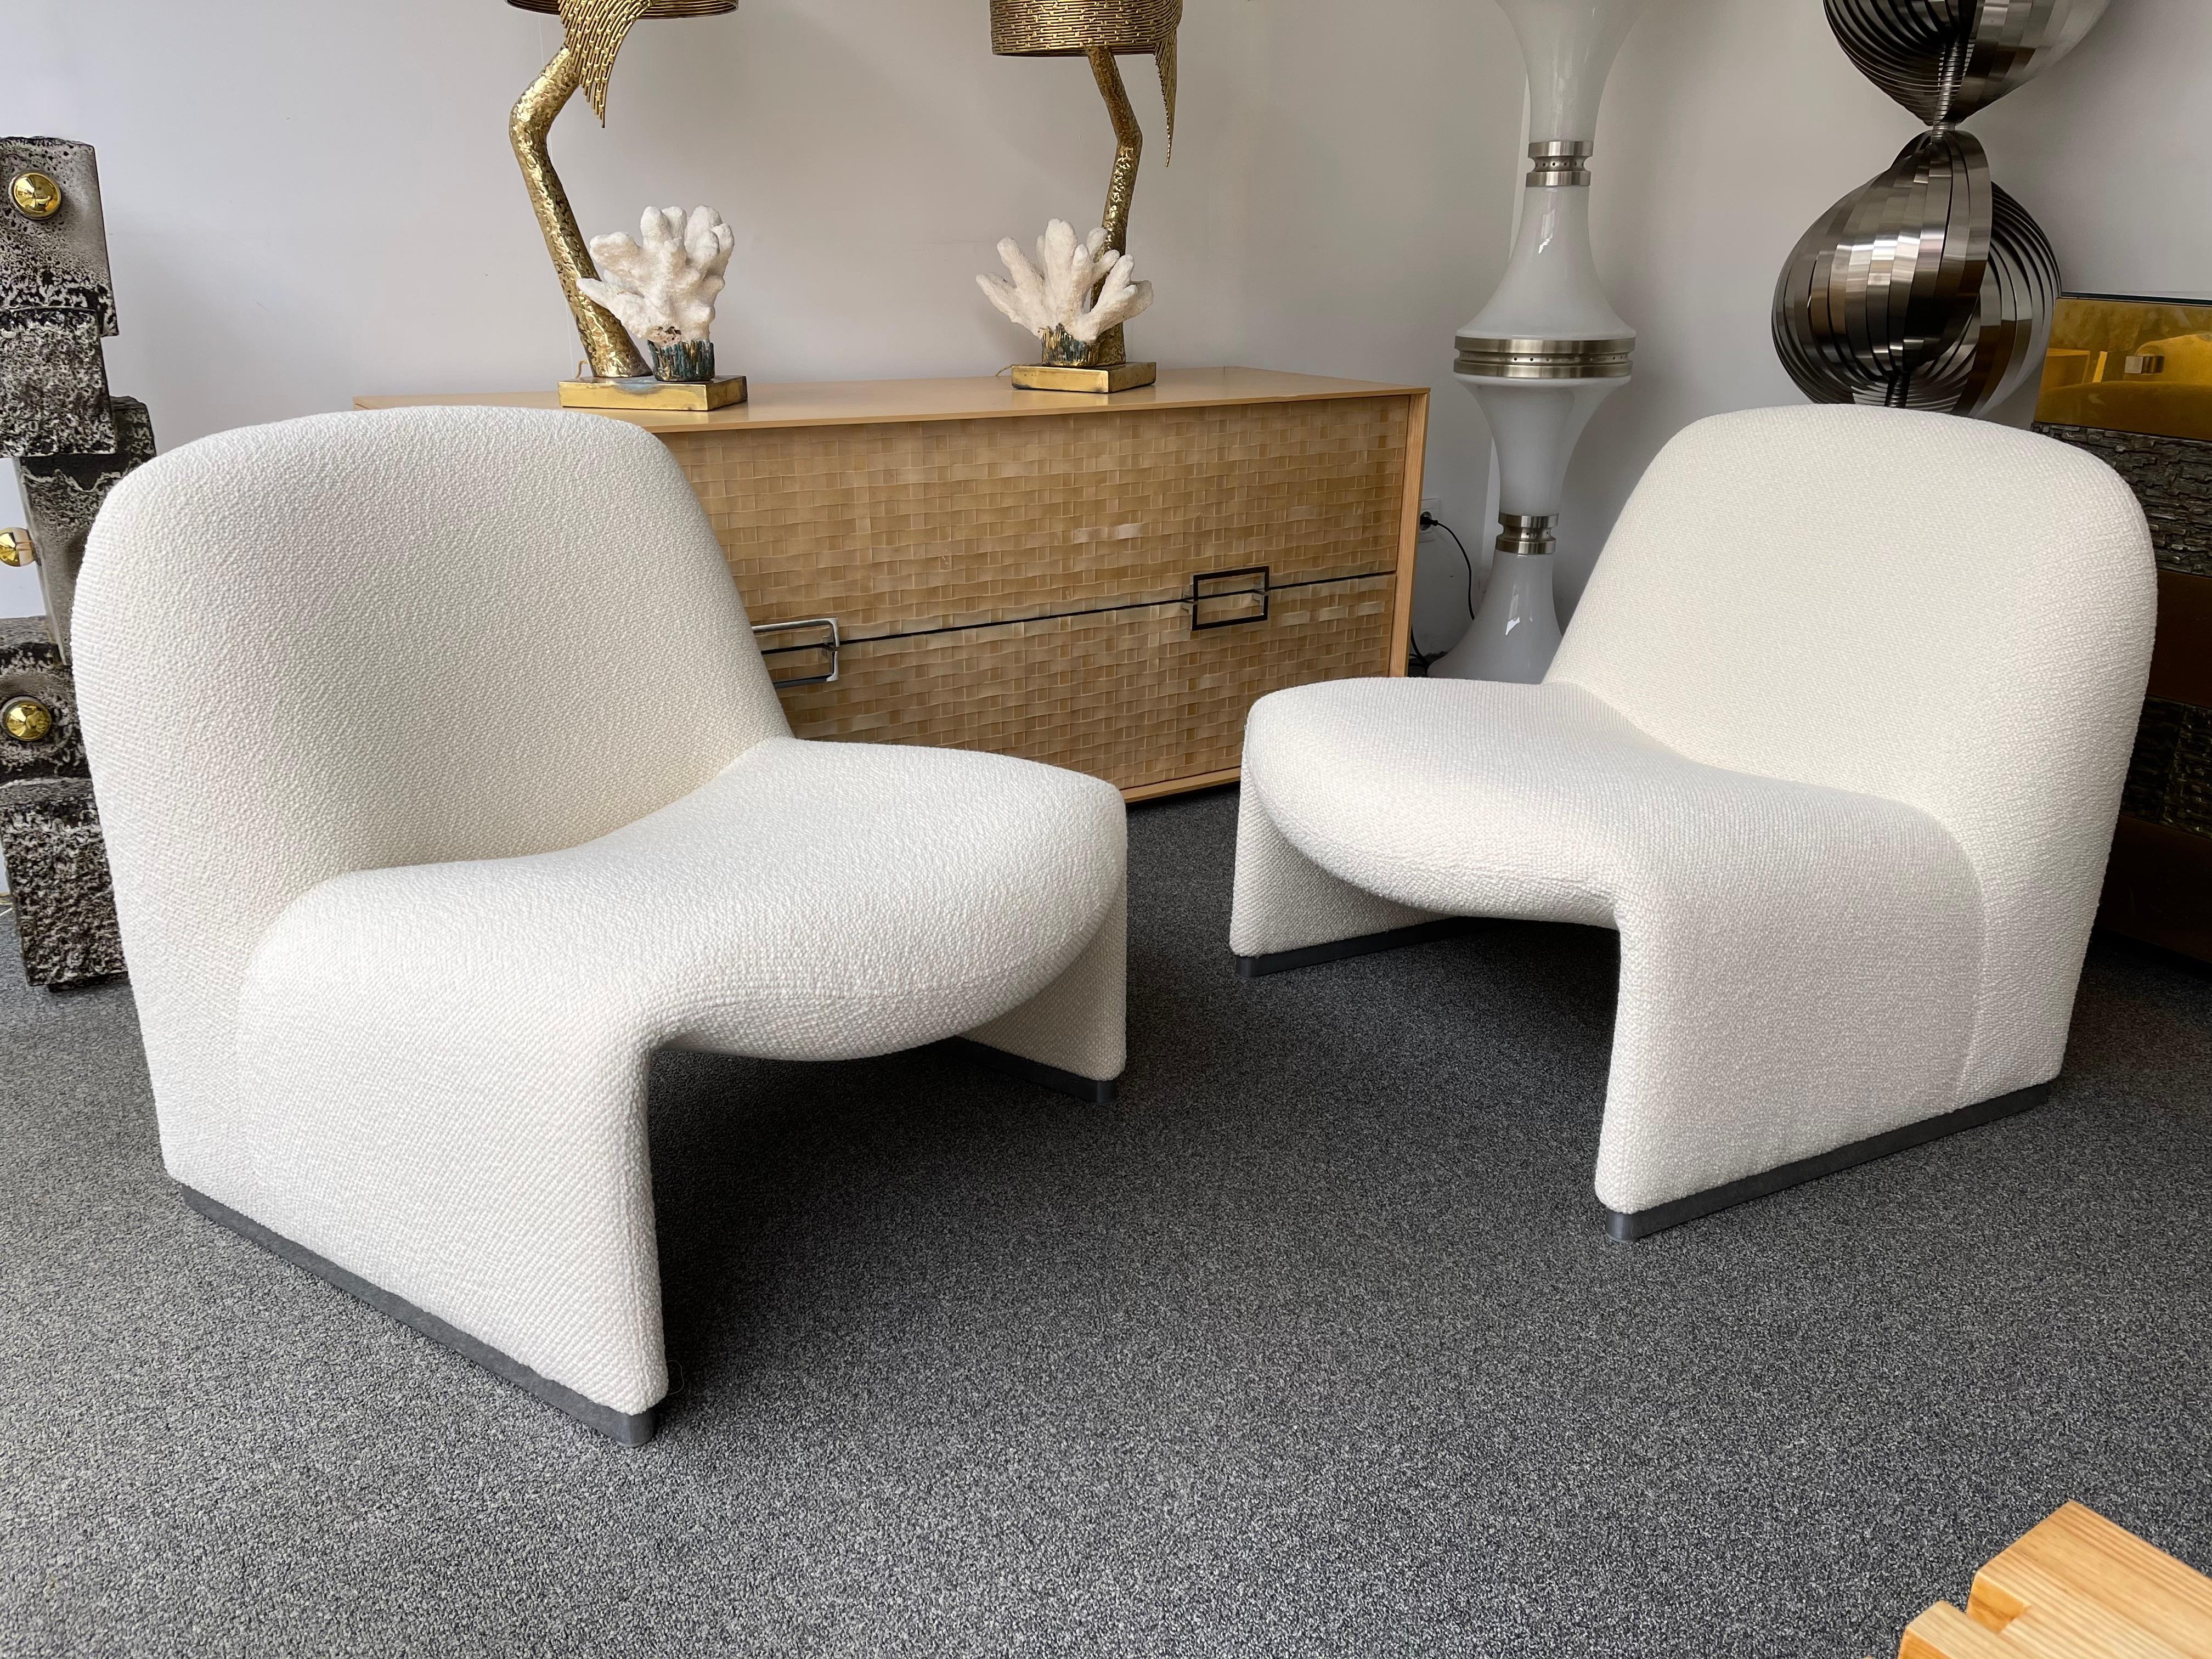 Pair of slipper chairs armchairs model Alky by the Italian designer Giancarlo Piretti for the editor manufacture Anonima Castelli design 1969, here is an edition from the 1970s fully upholstered new upholstery in bouclé fabric. Famous design like